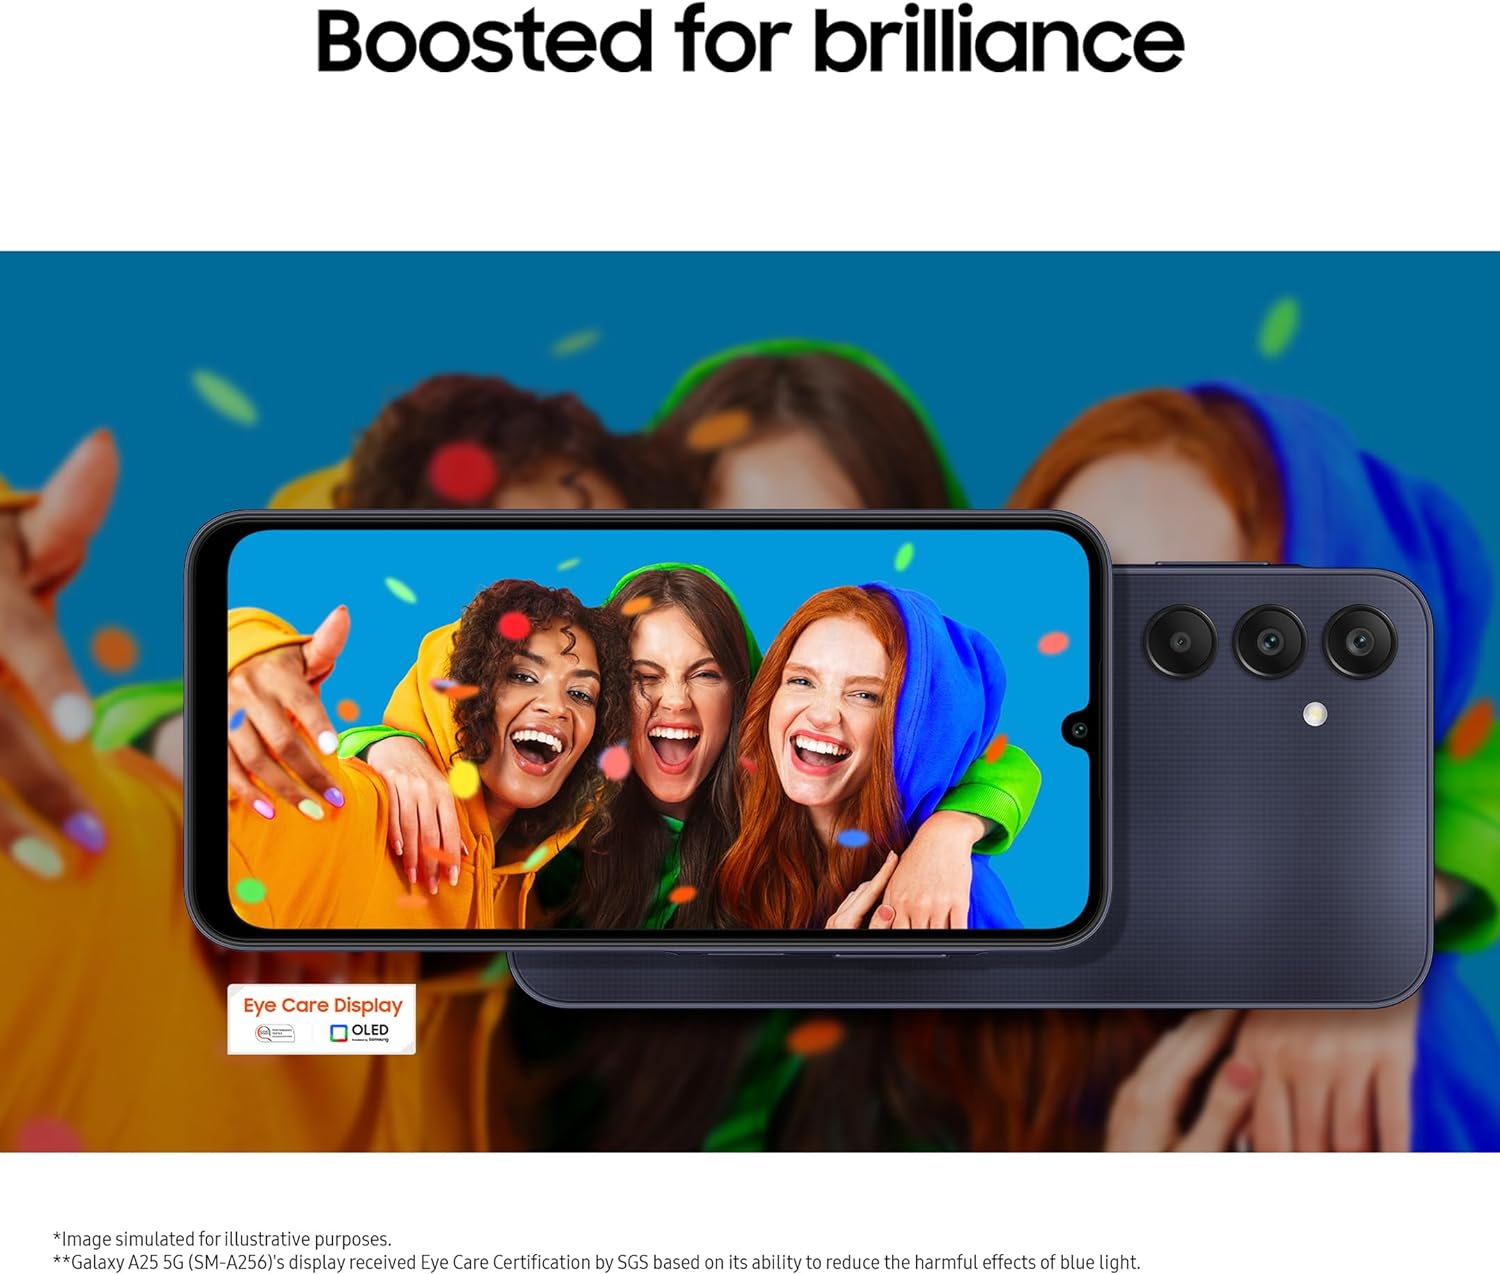 The image shows an advertisement for a Galaxy A25 5G, specifically highlighting its display quality.